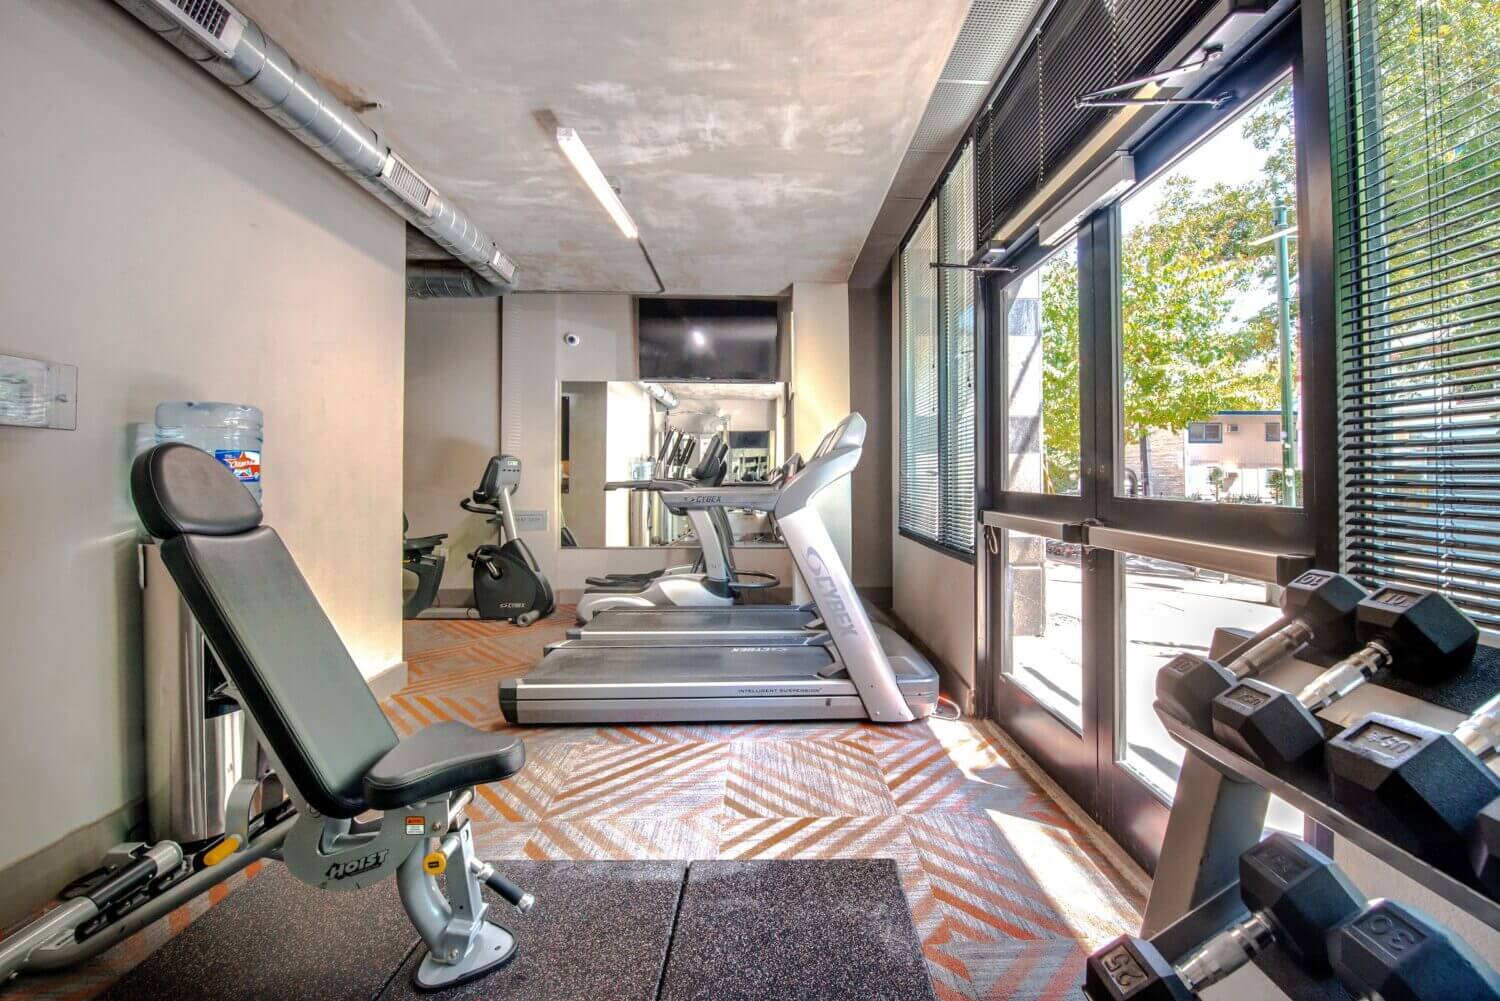 Alternate view of fitness center with treadmills, elliptical, free weights and strength training equipment